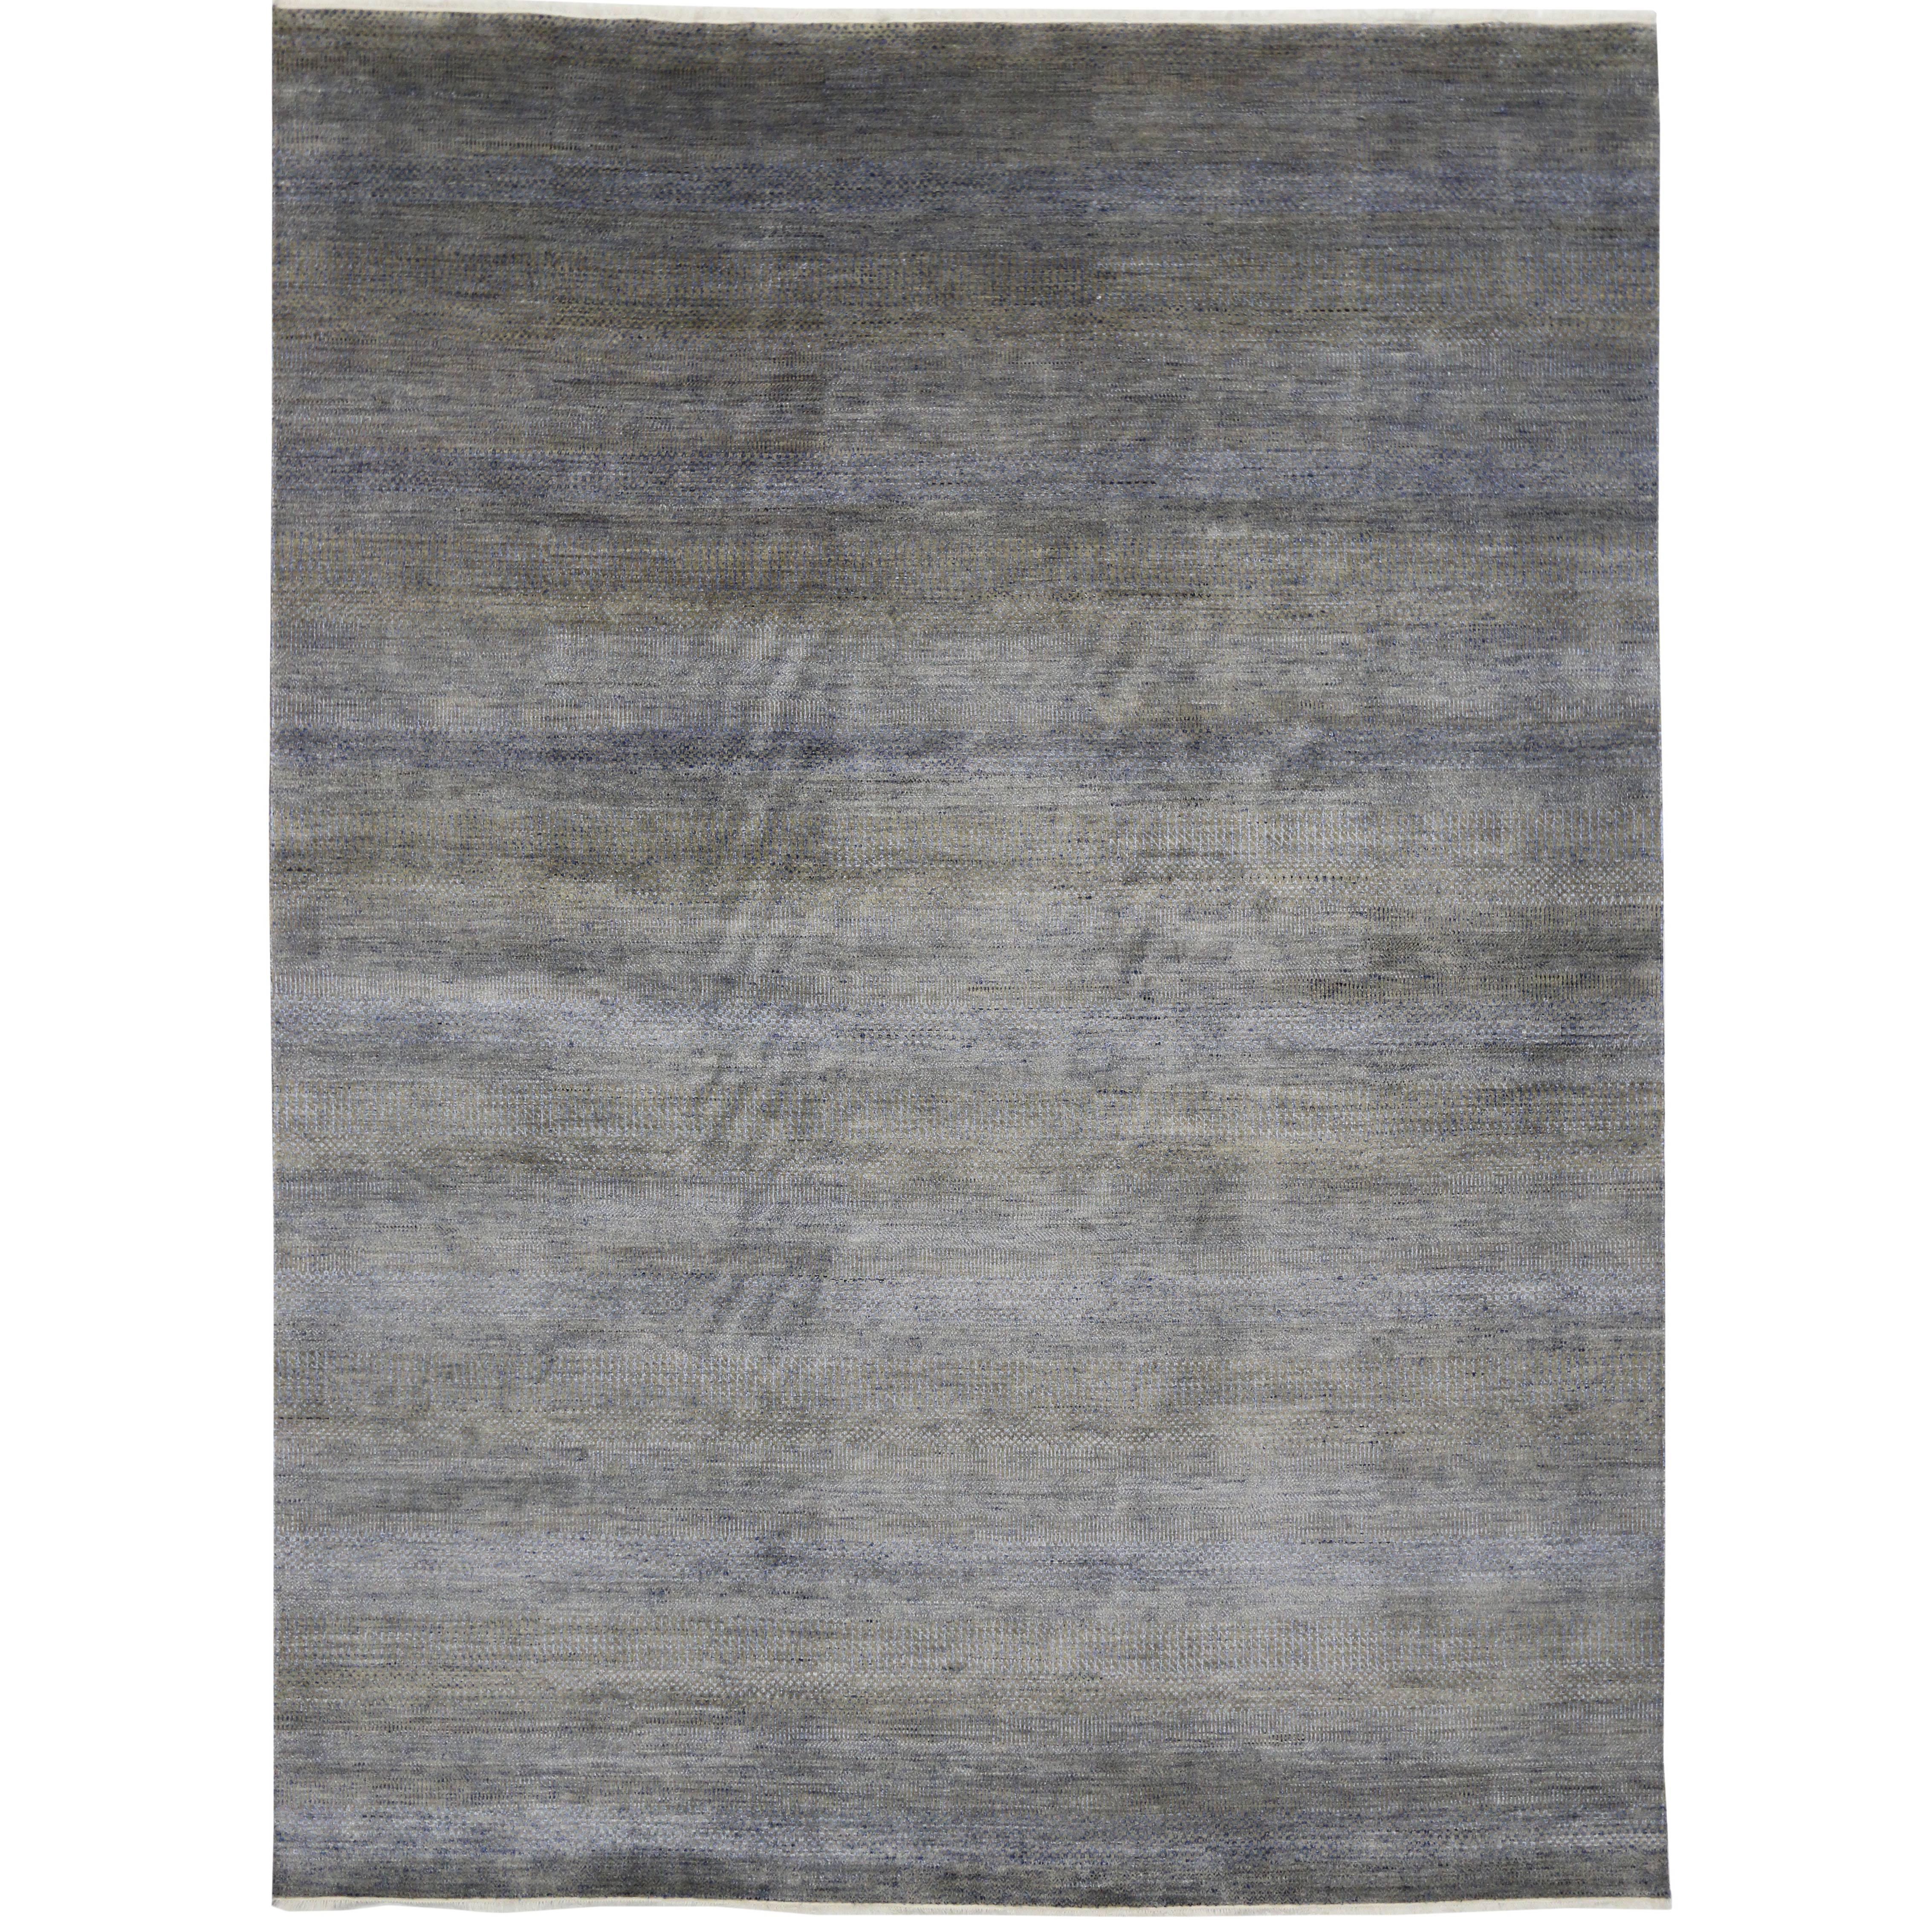 New Contemporary Transitional Gray Area Rug with Modern International Style